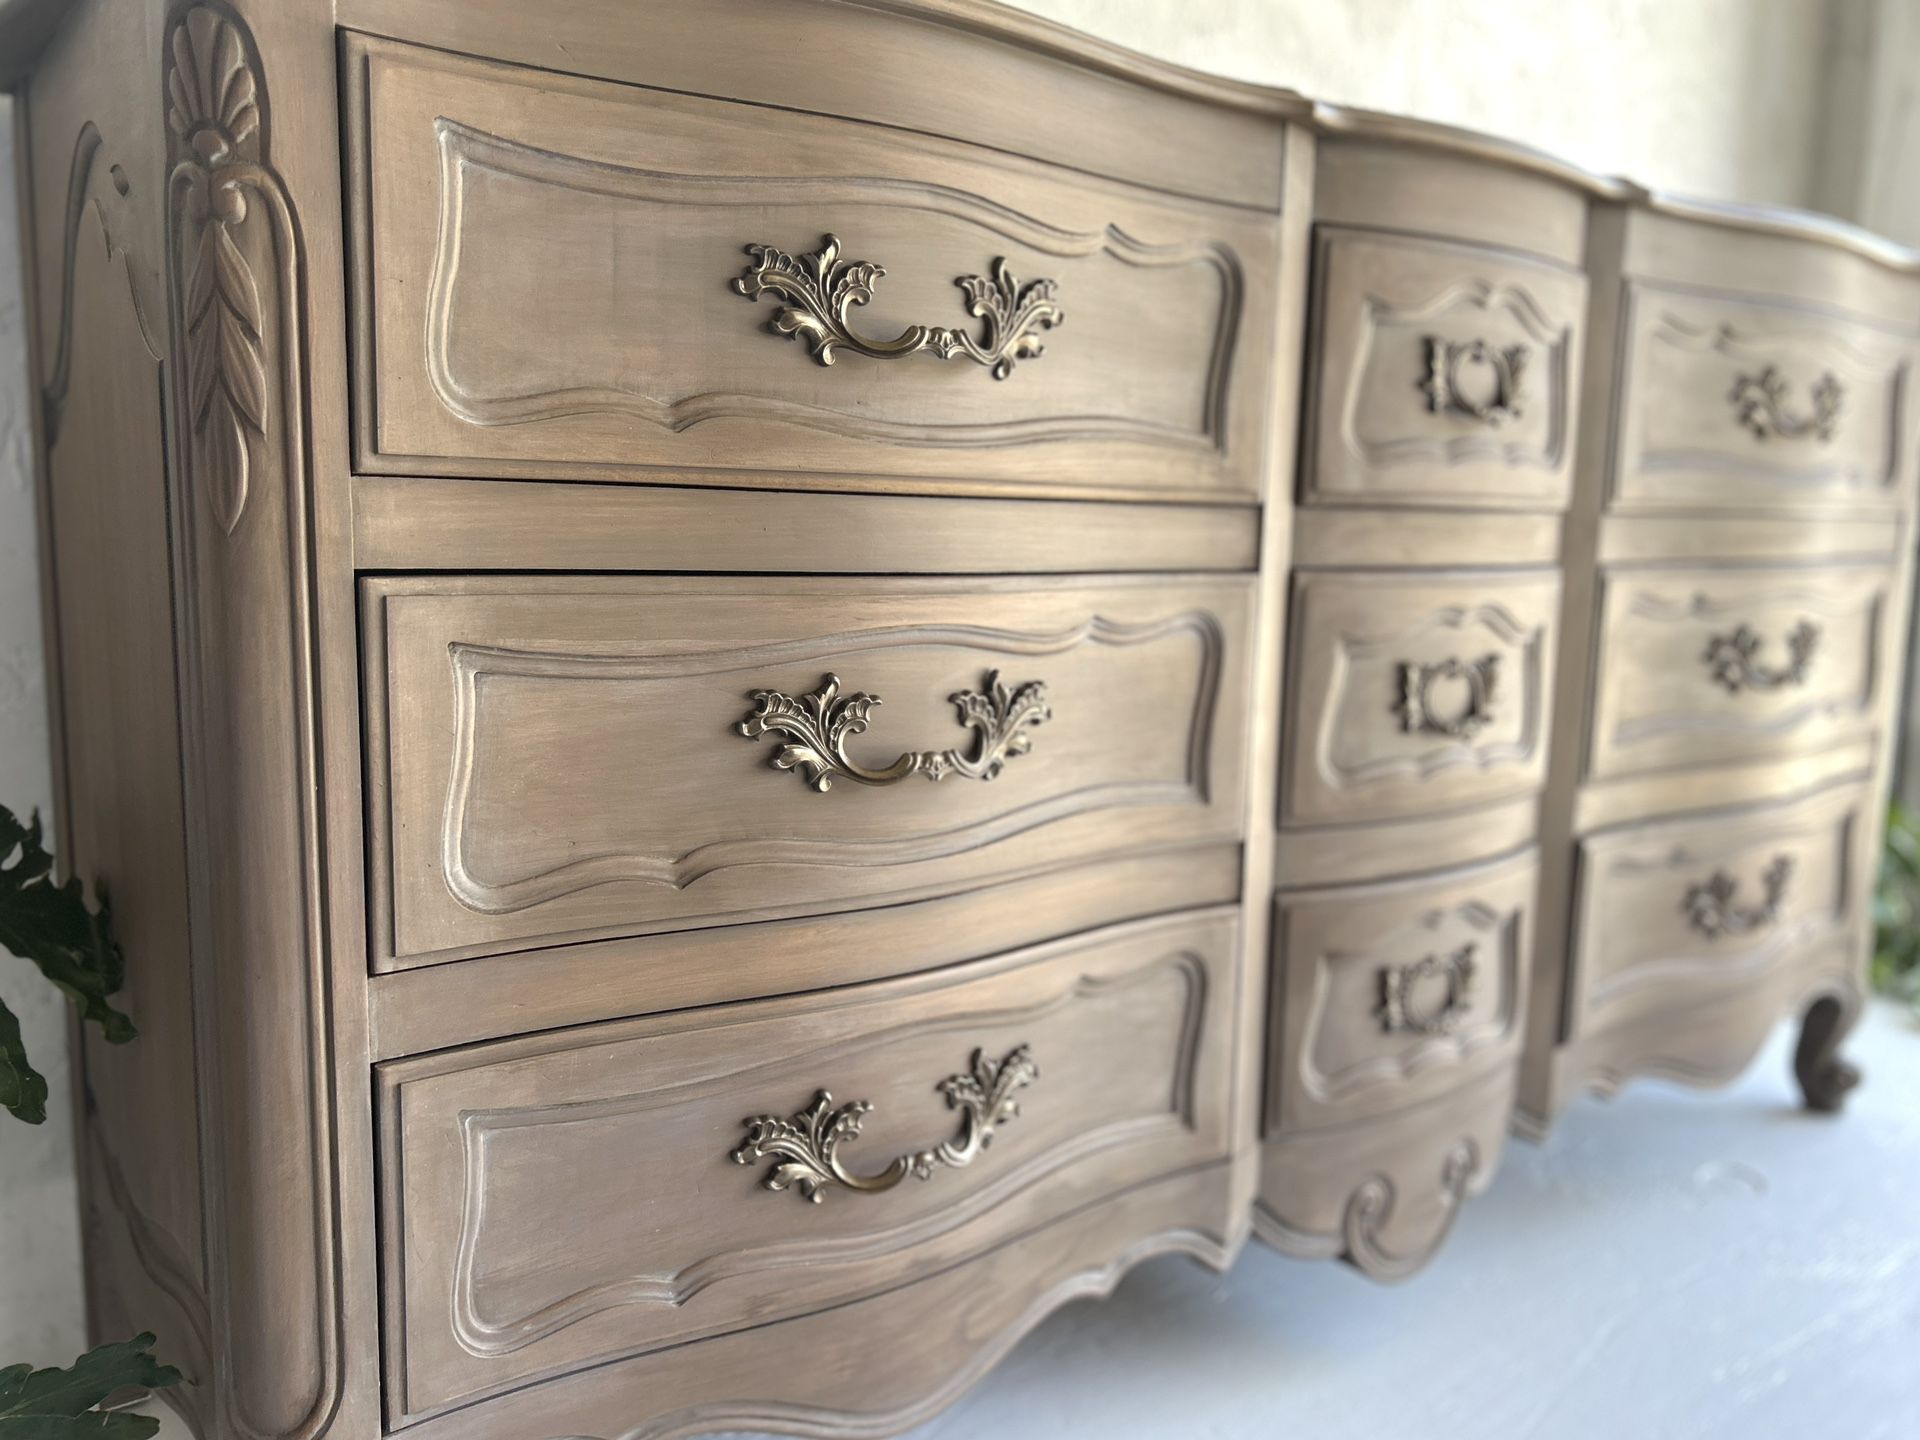 Refinished Rustic French Solid Wood 9 Drawer Dresser Sideboard